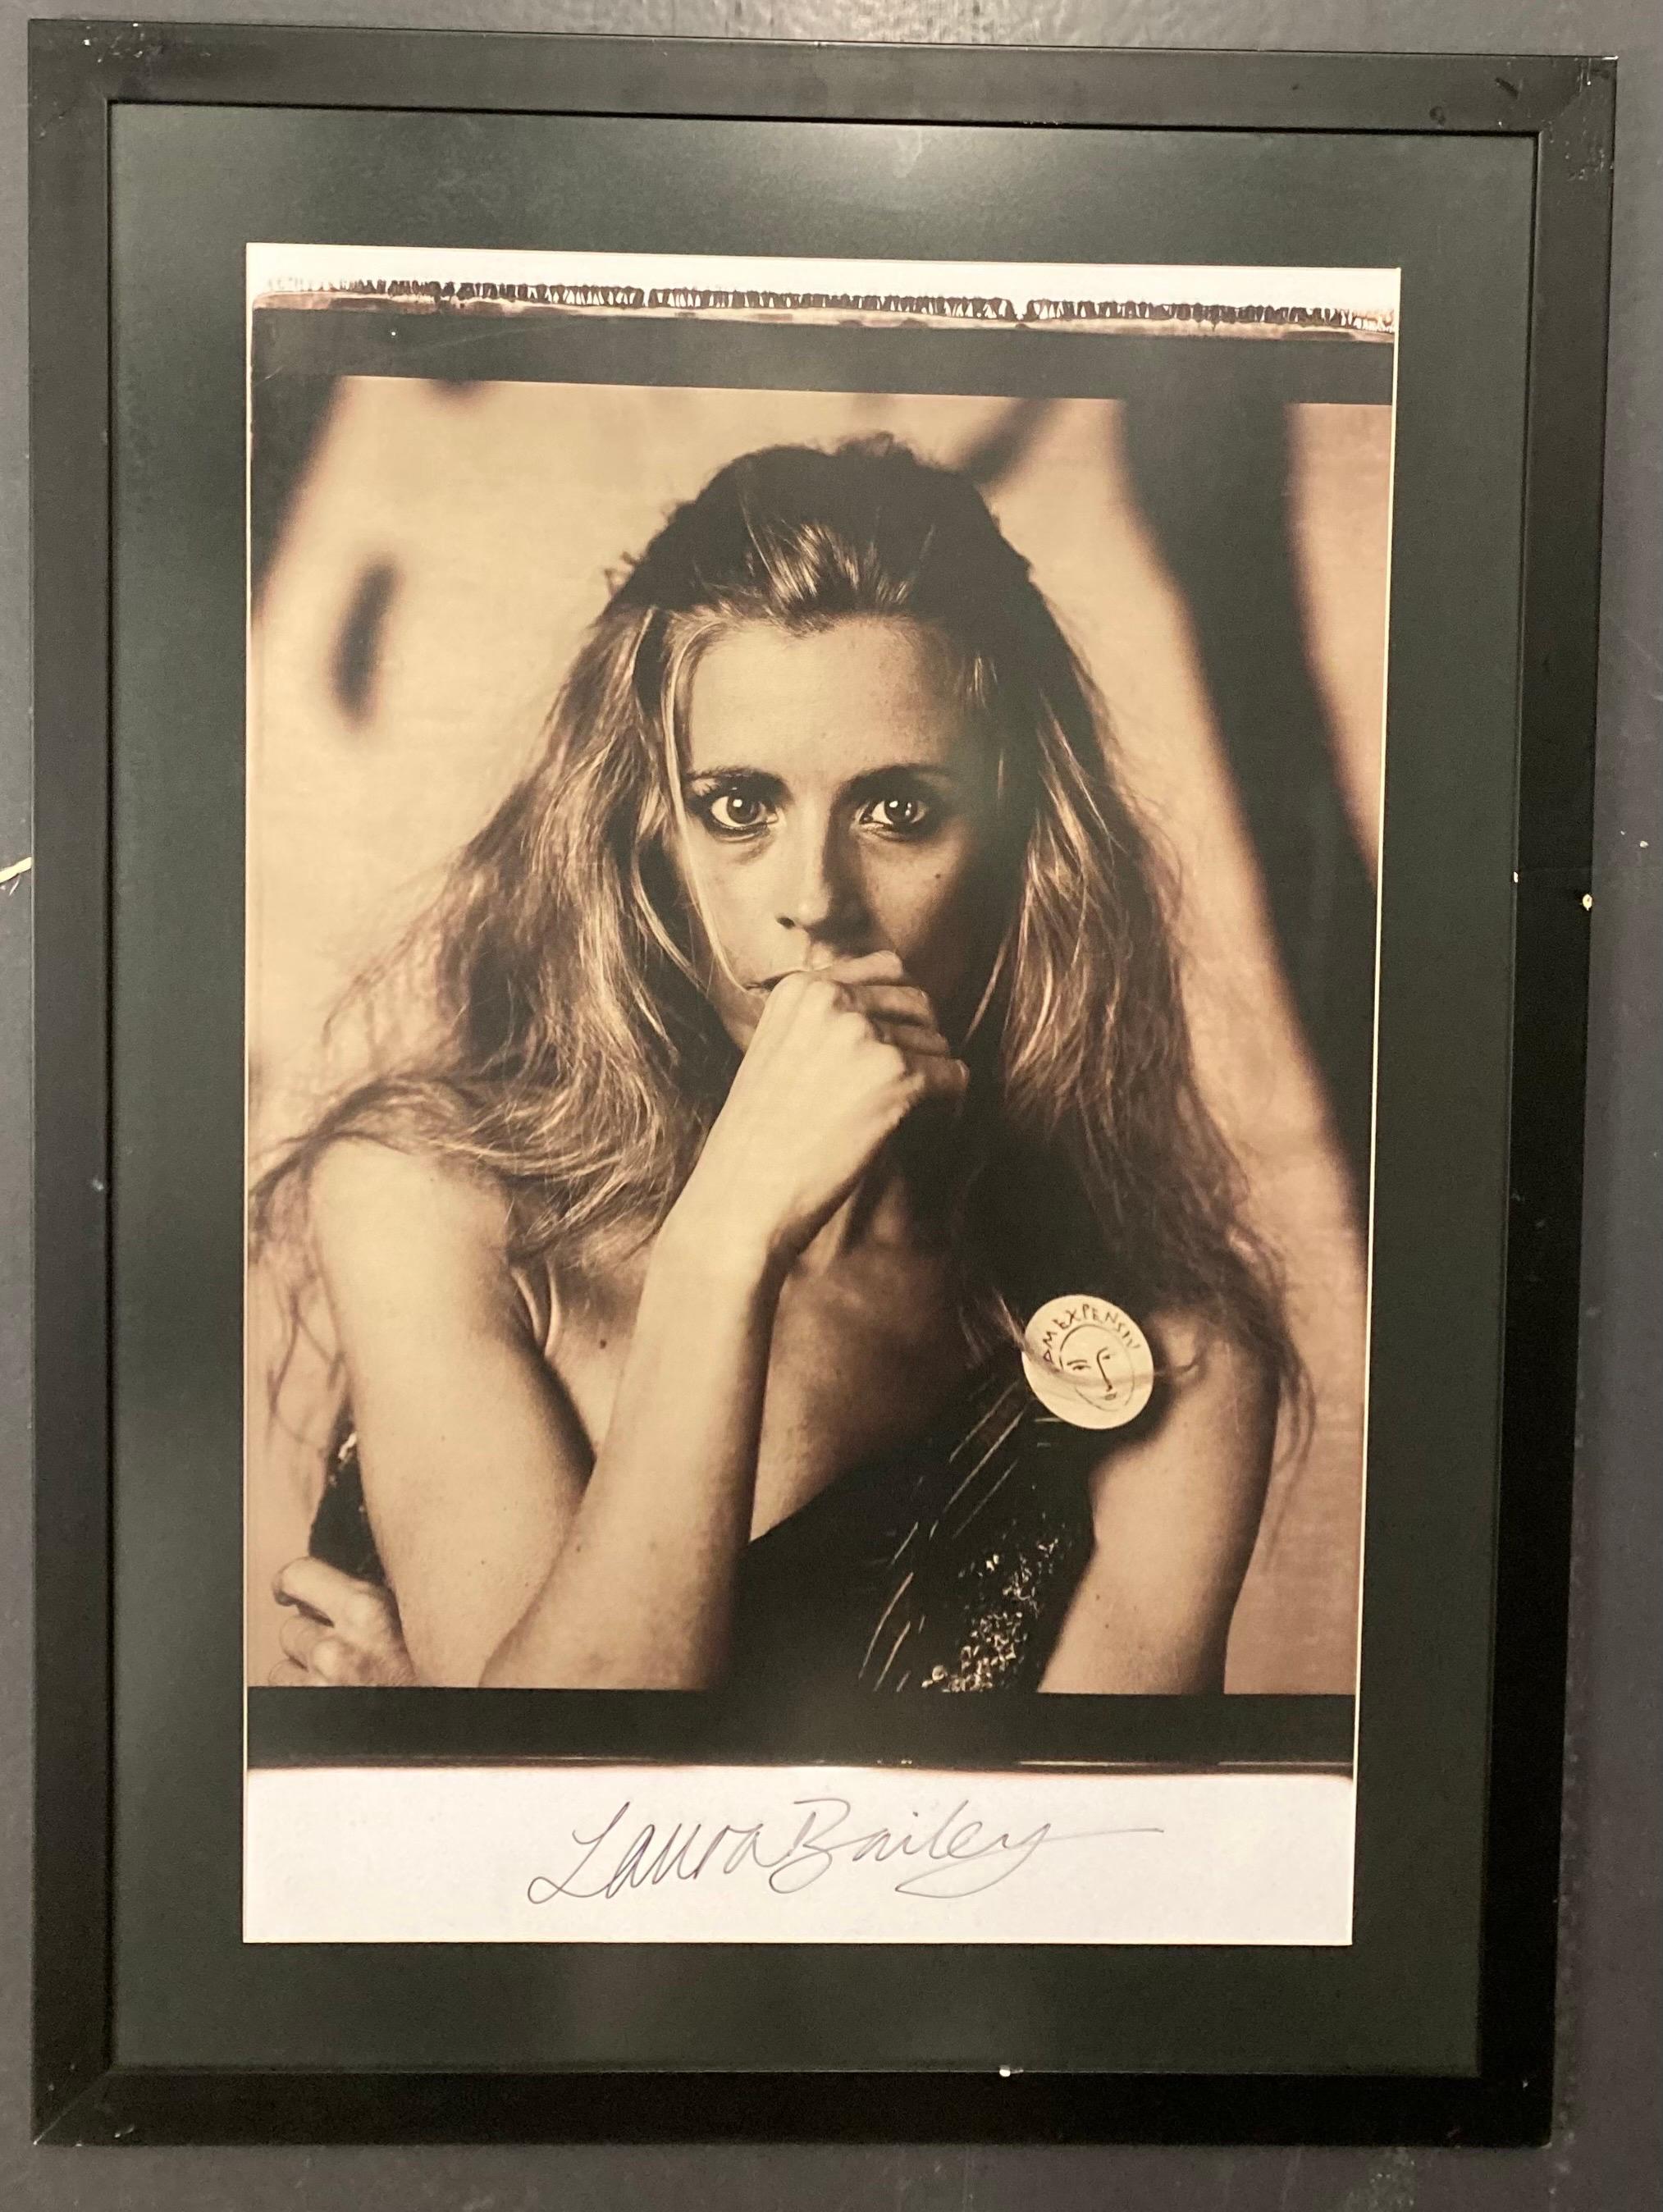 An original one-off large format Polaroid photograph of Laura Bailey for the Vivienne Westwood Active Resistance limited edition book produced by Opus. By photographer Zenon Texeira.
Signed by Laura Bailey in marker pen.

Large-format polaroids are